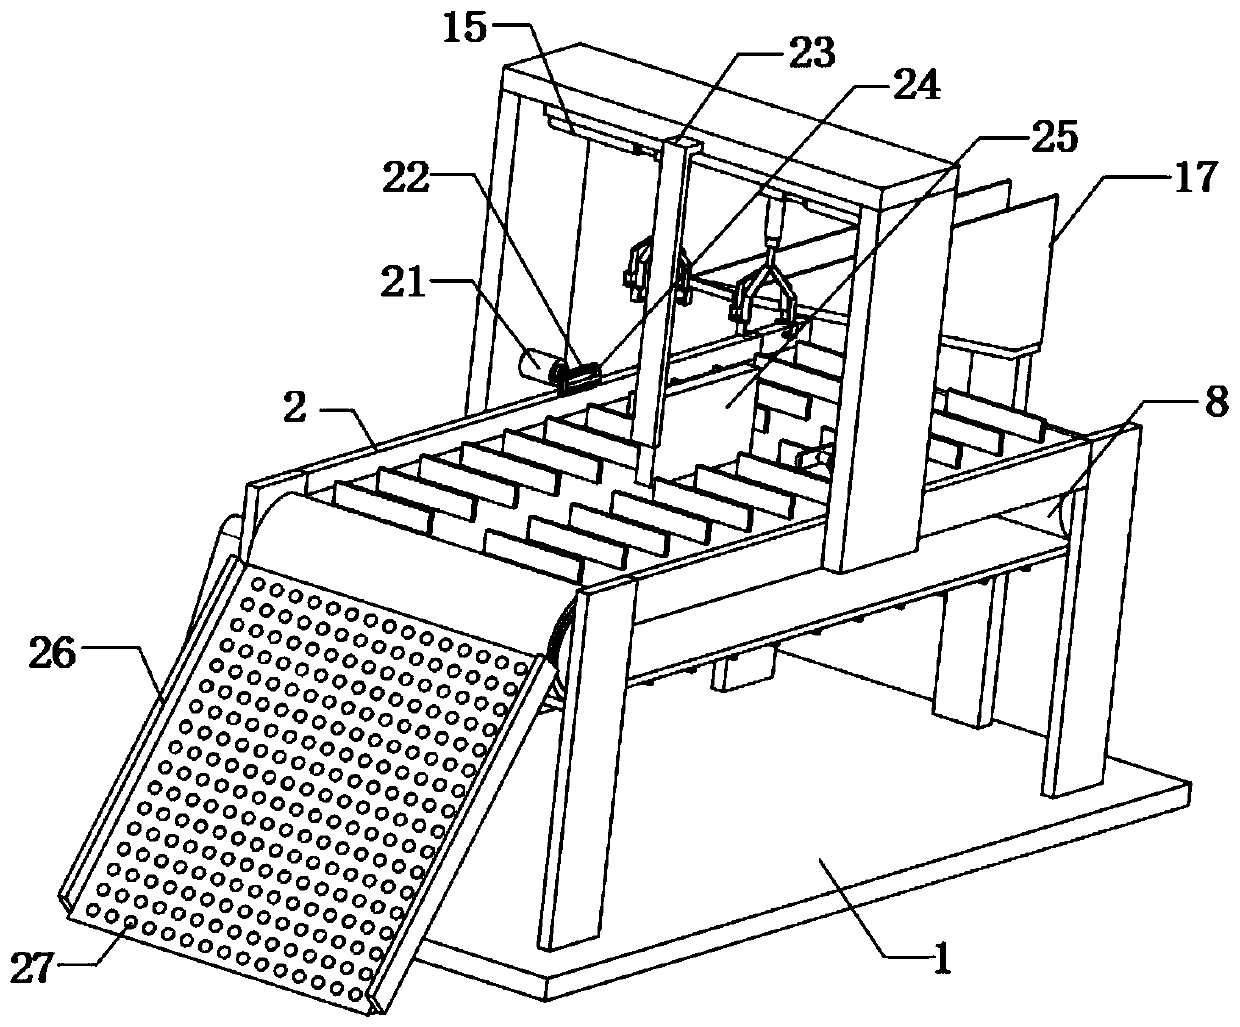 Bagged food conveying and detecting device